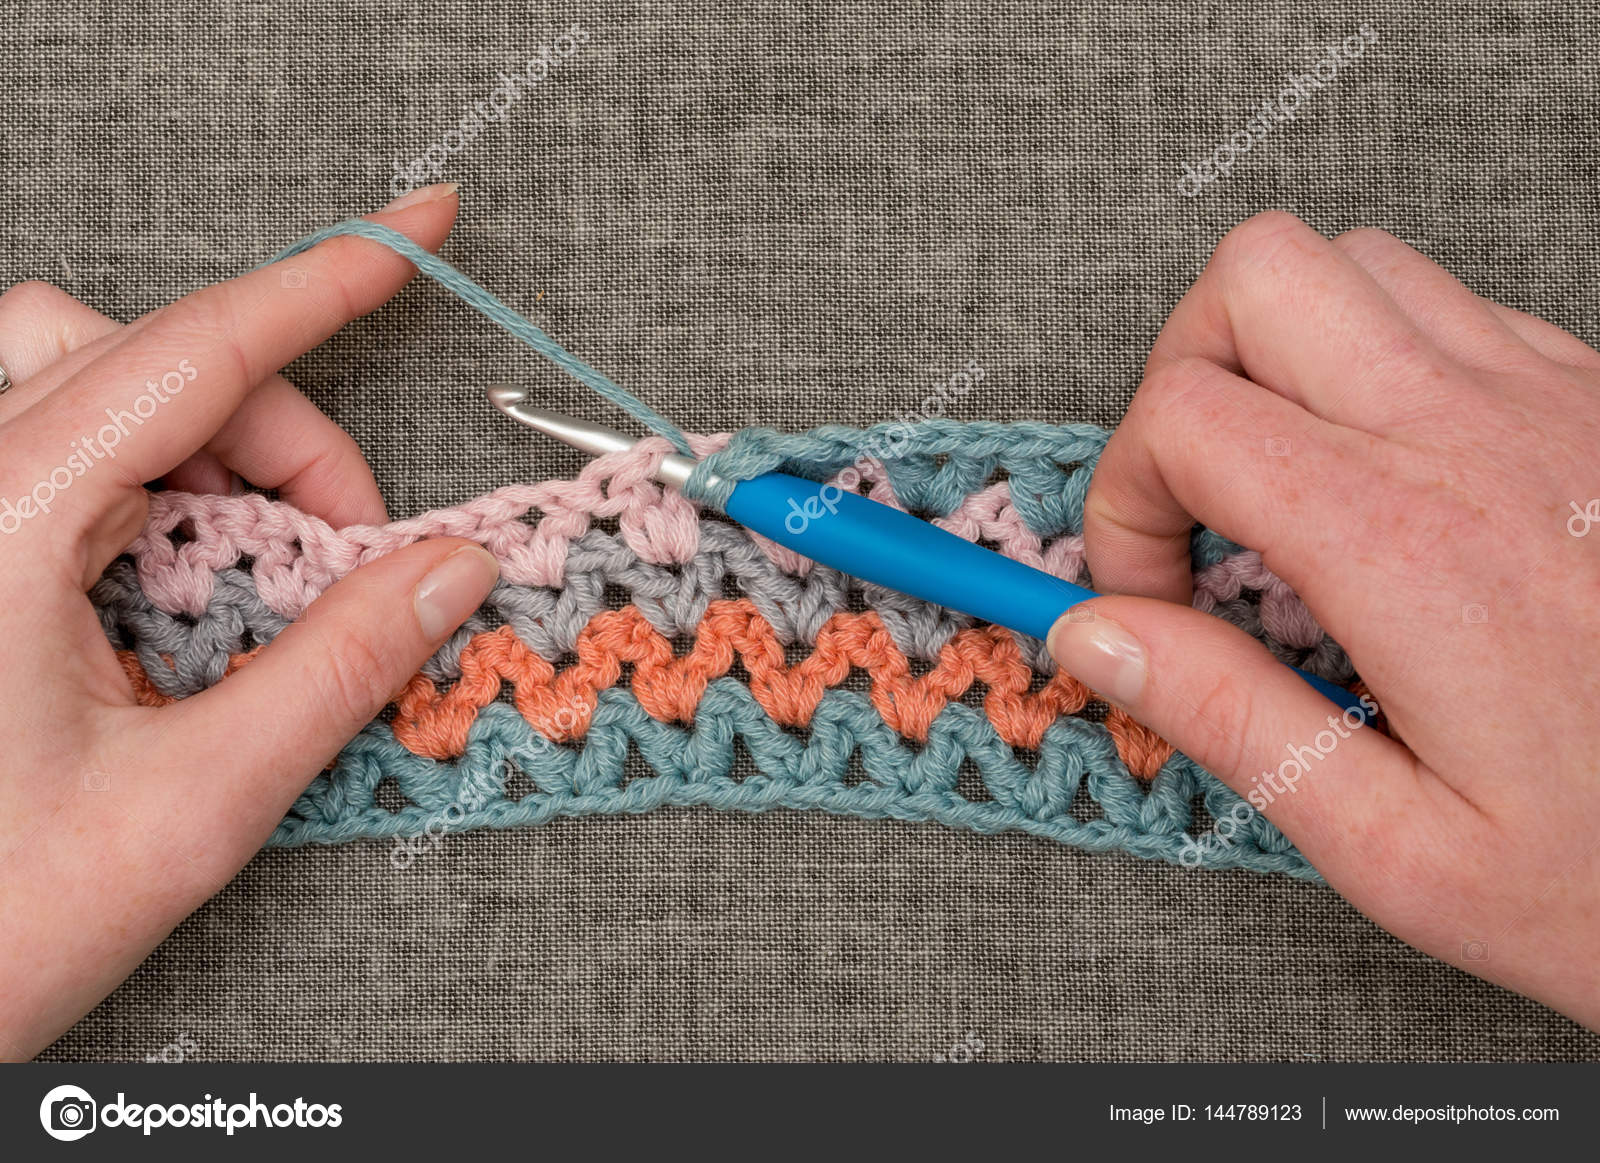 Hands Knitting Hook and Crocheted Band with Wavy Color Pattern